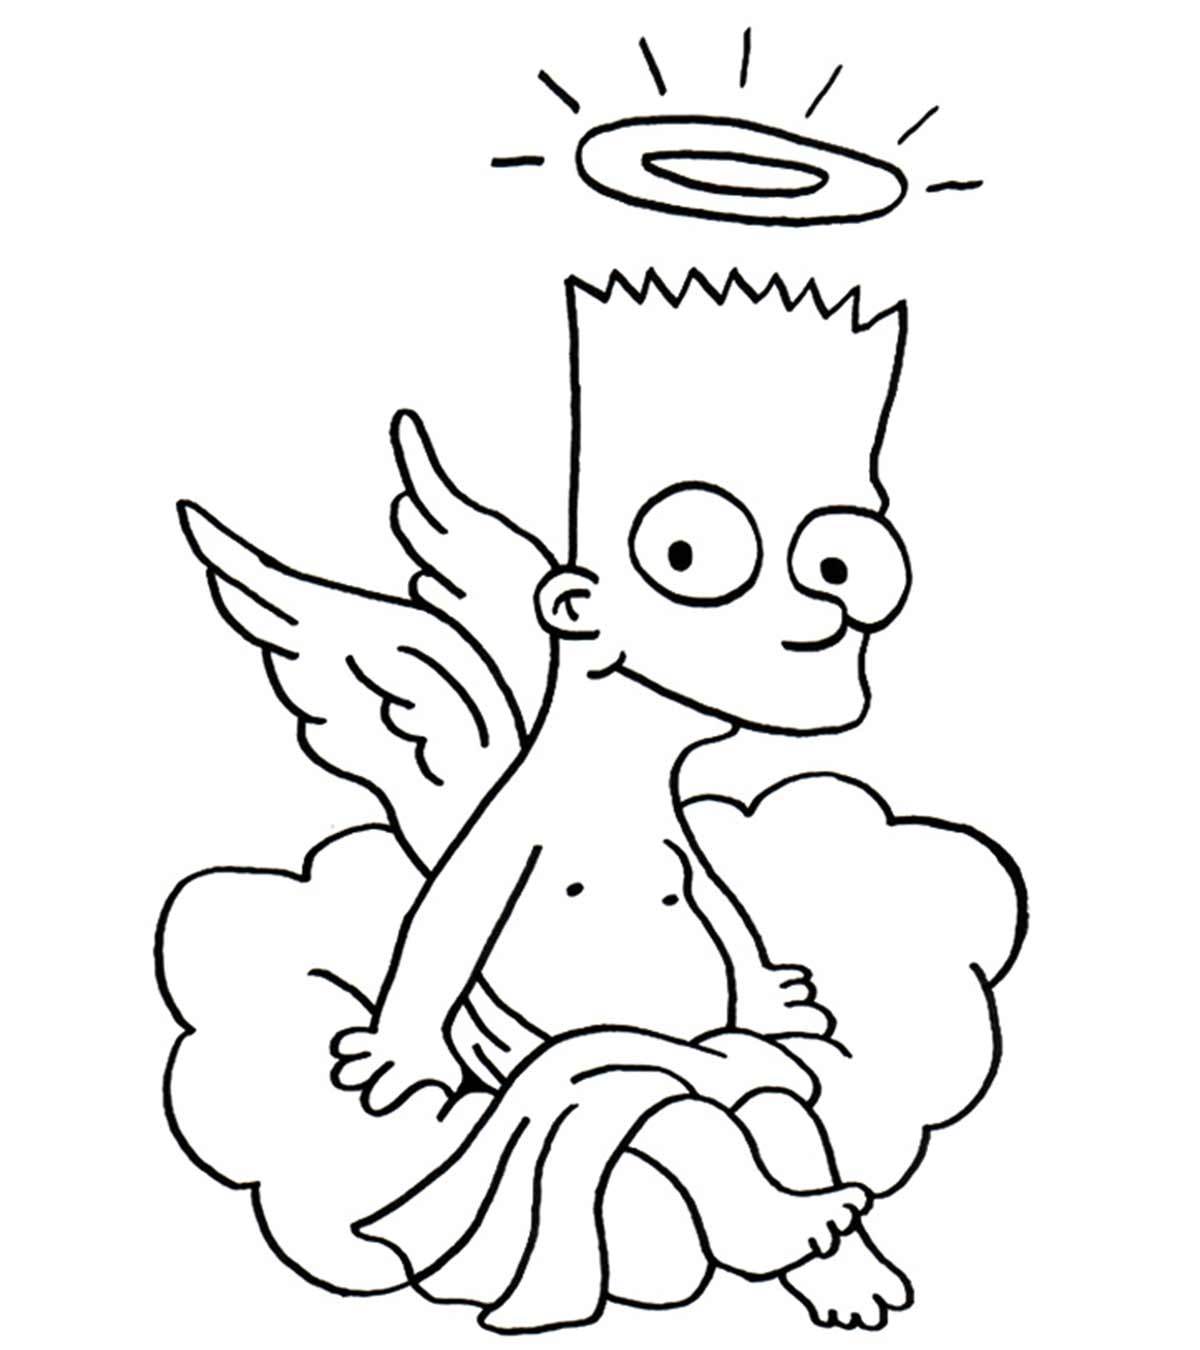 10 Best Simpsons Coloring Pages Your Toddler Will Love_image